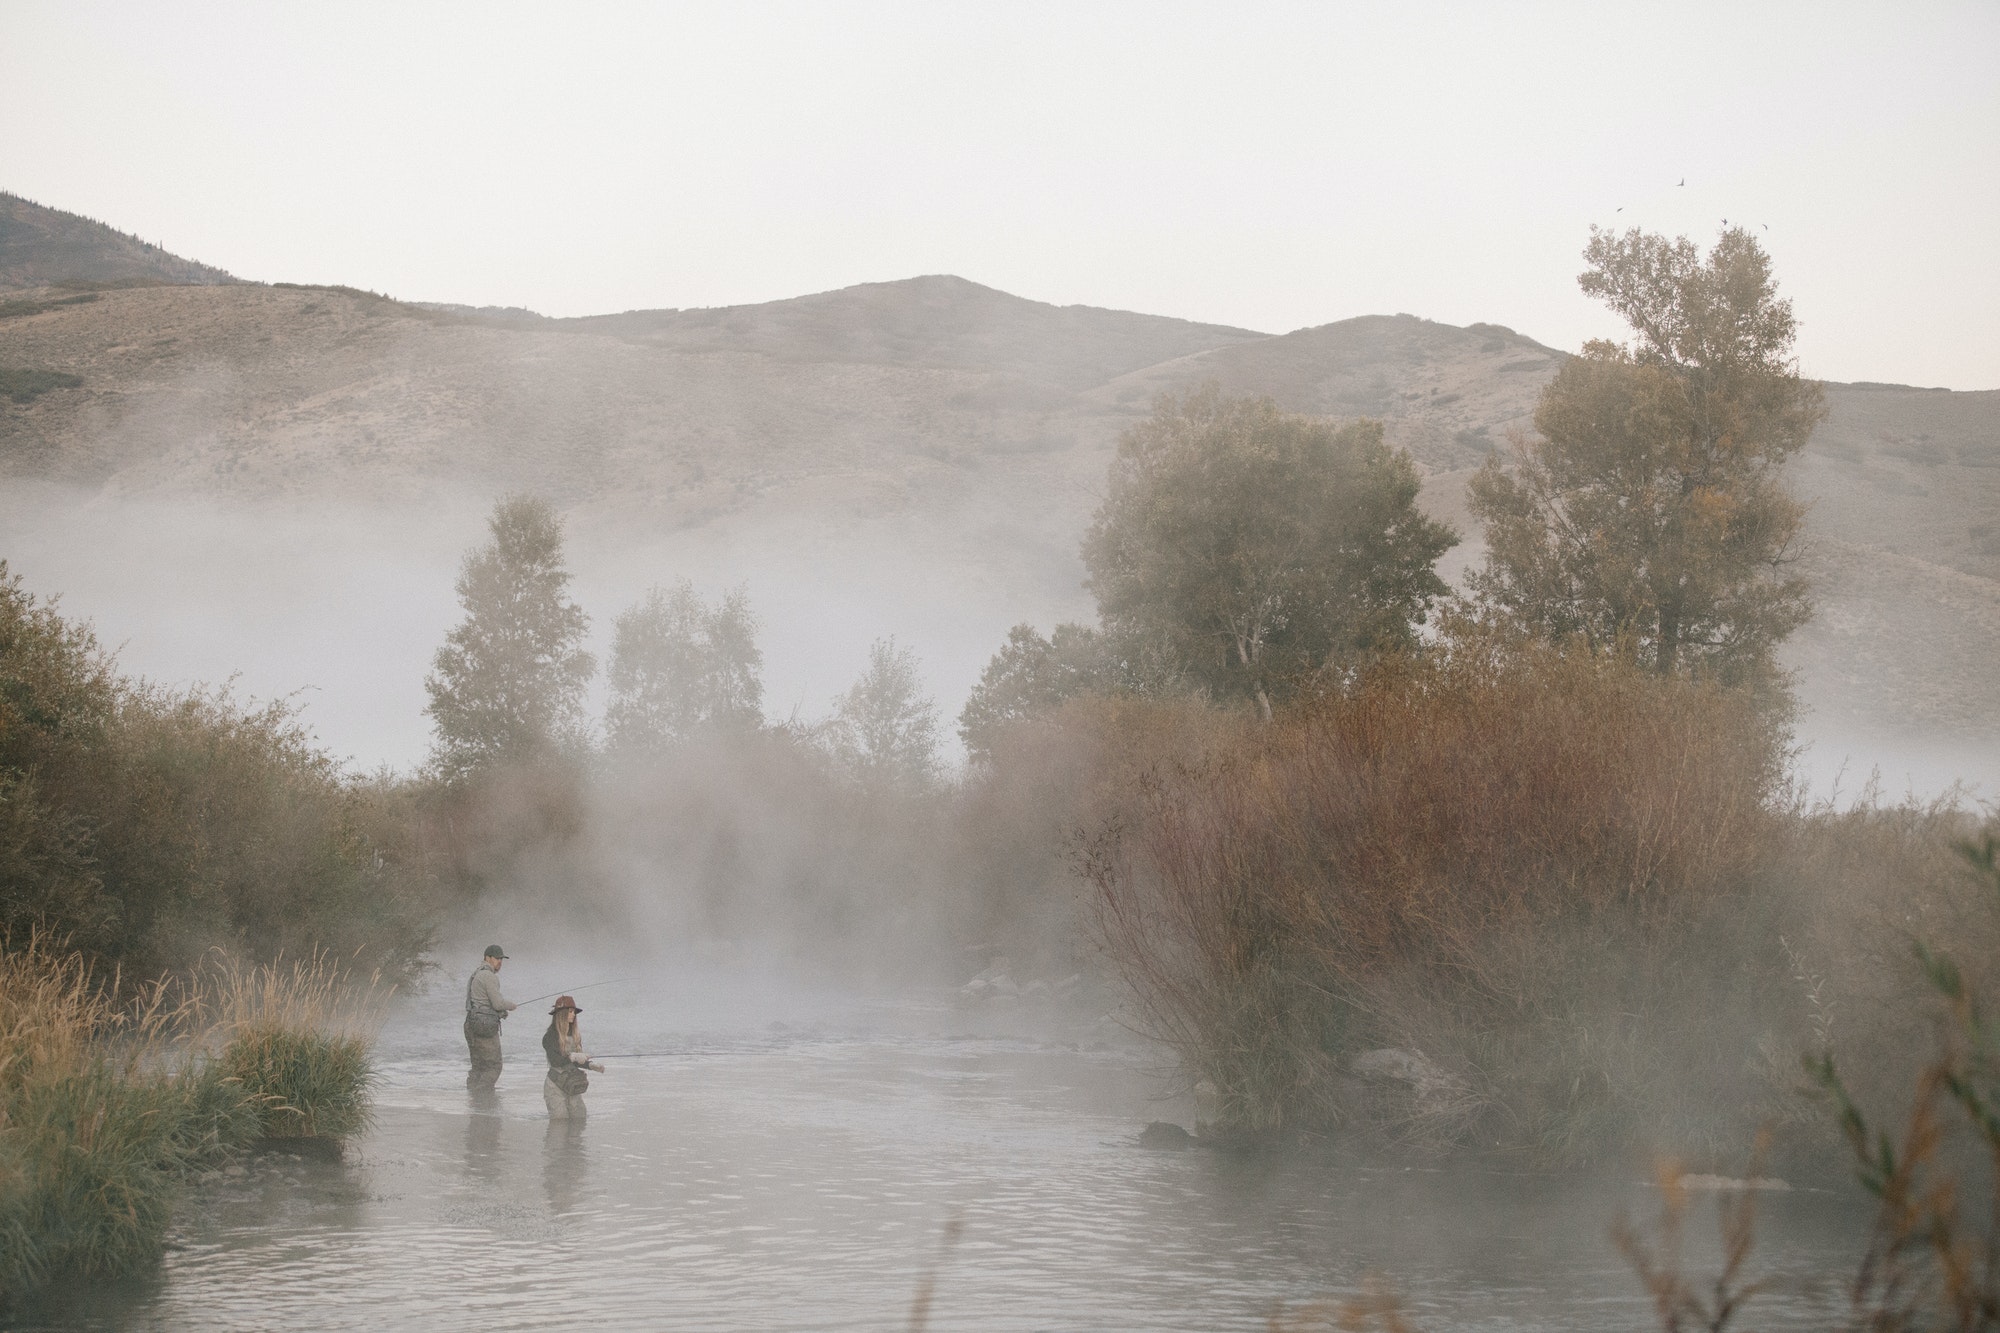 A couple, a man and woman standing in mid stream flyfishing in a river.